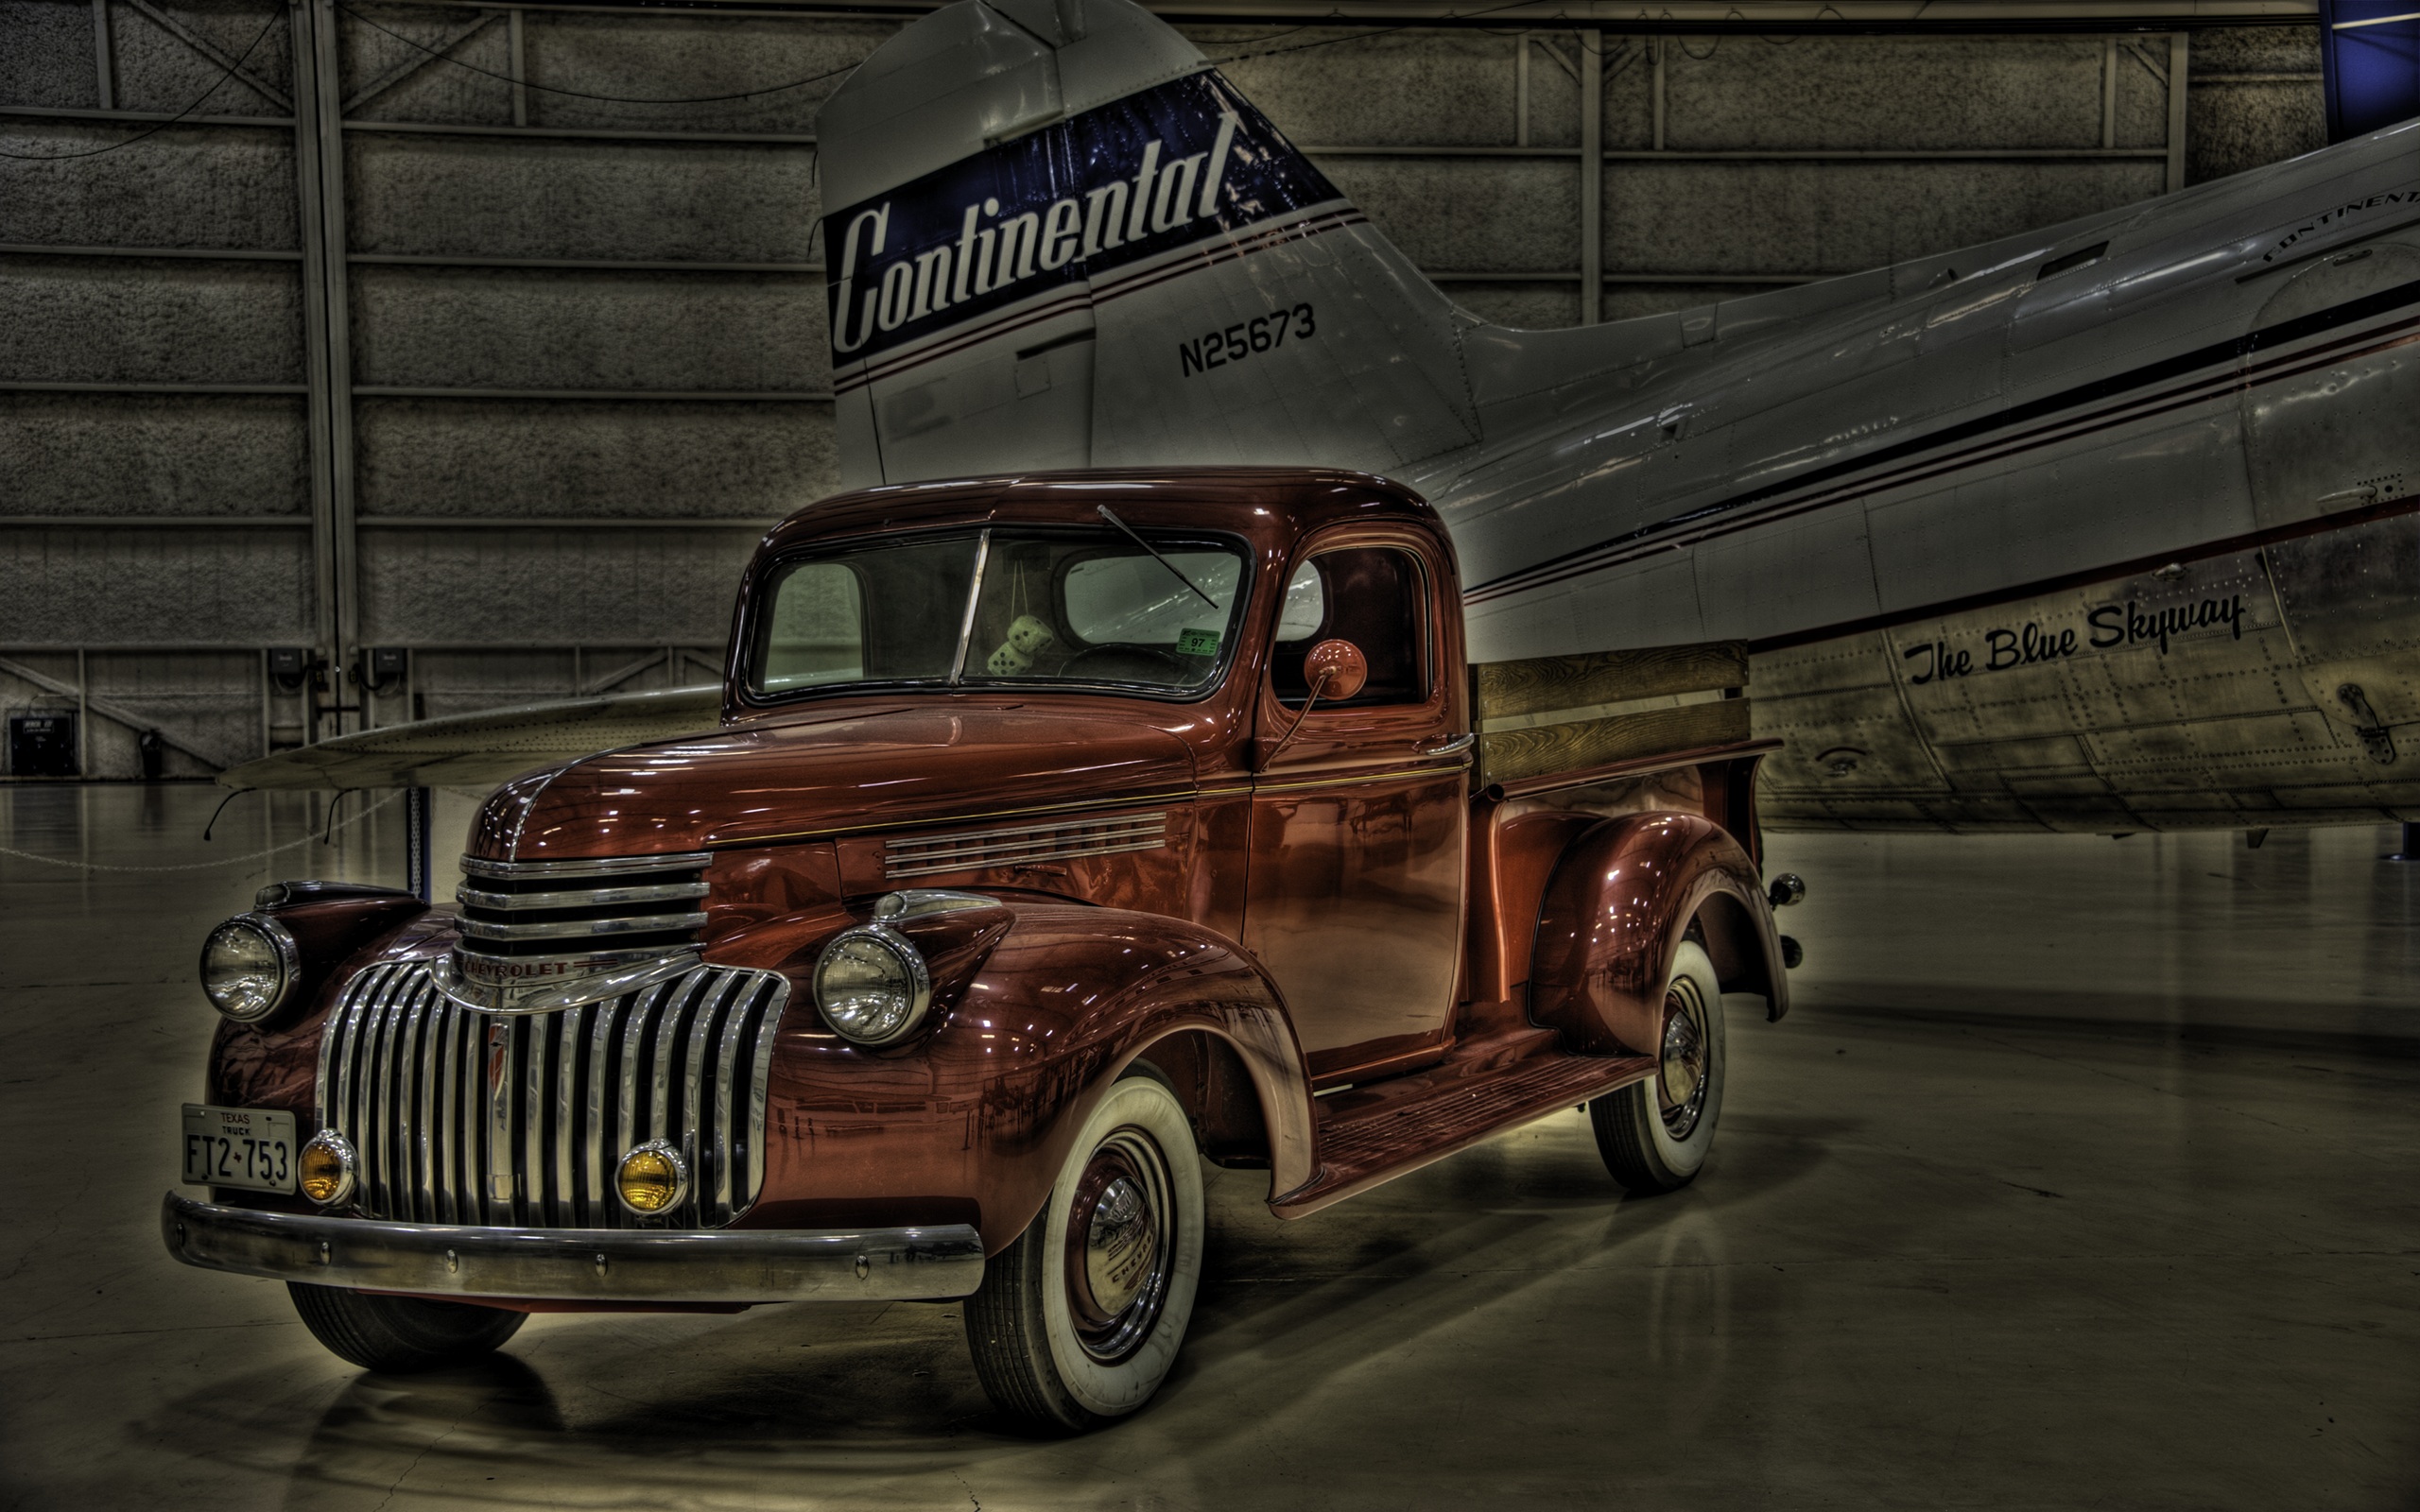 1941 Chevrolet Pickup Truck parked in a hangar with an aircraft in HDR.